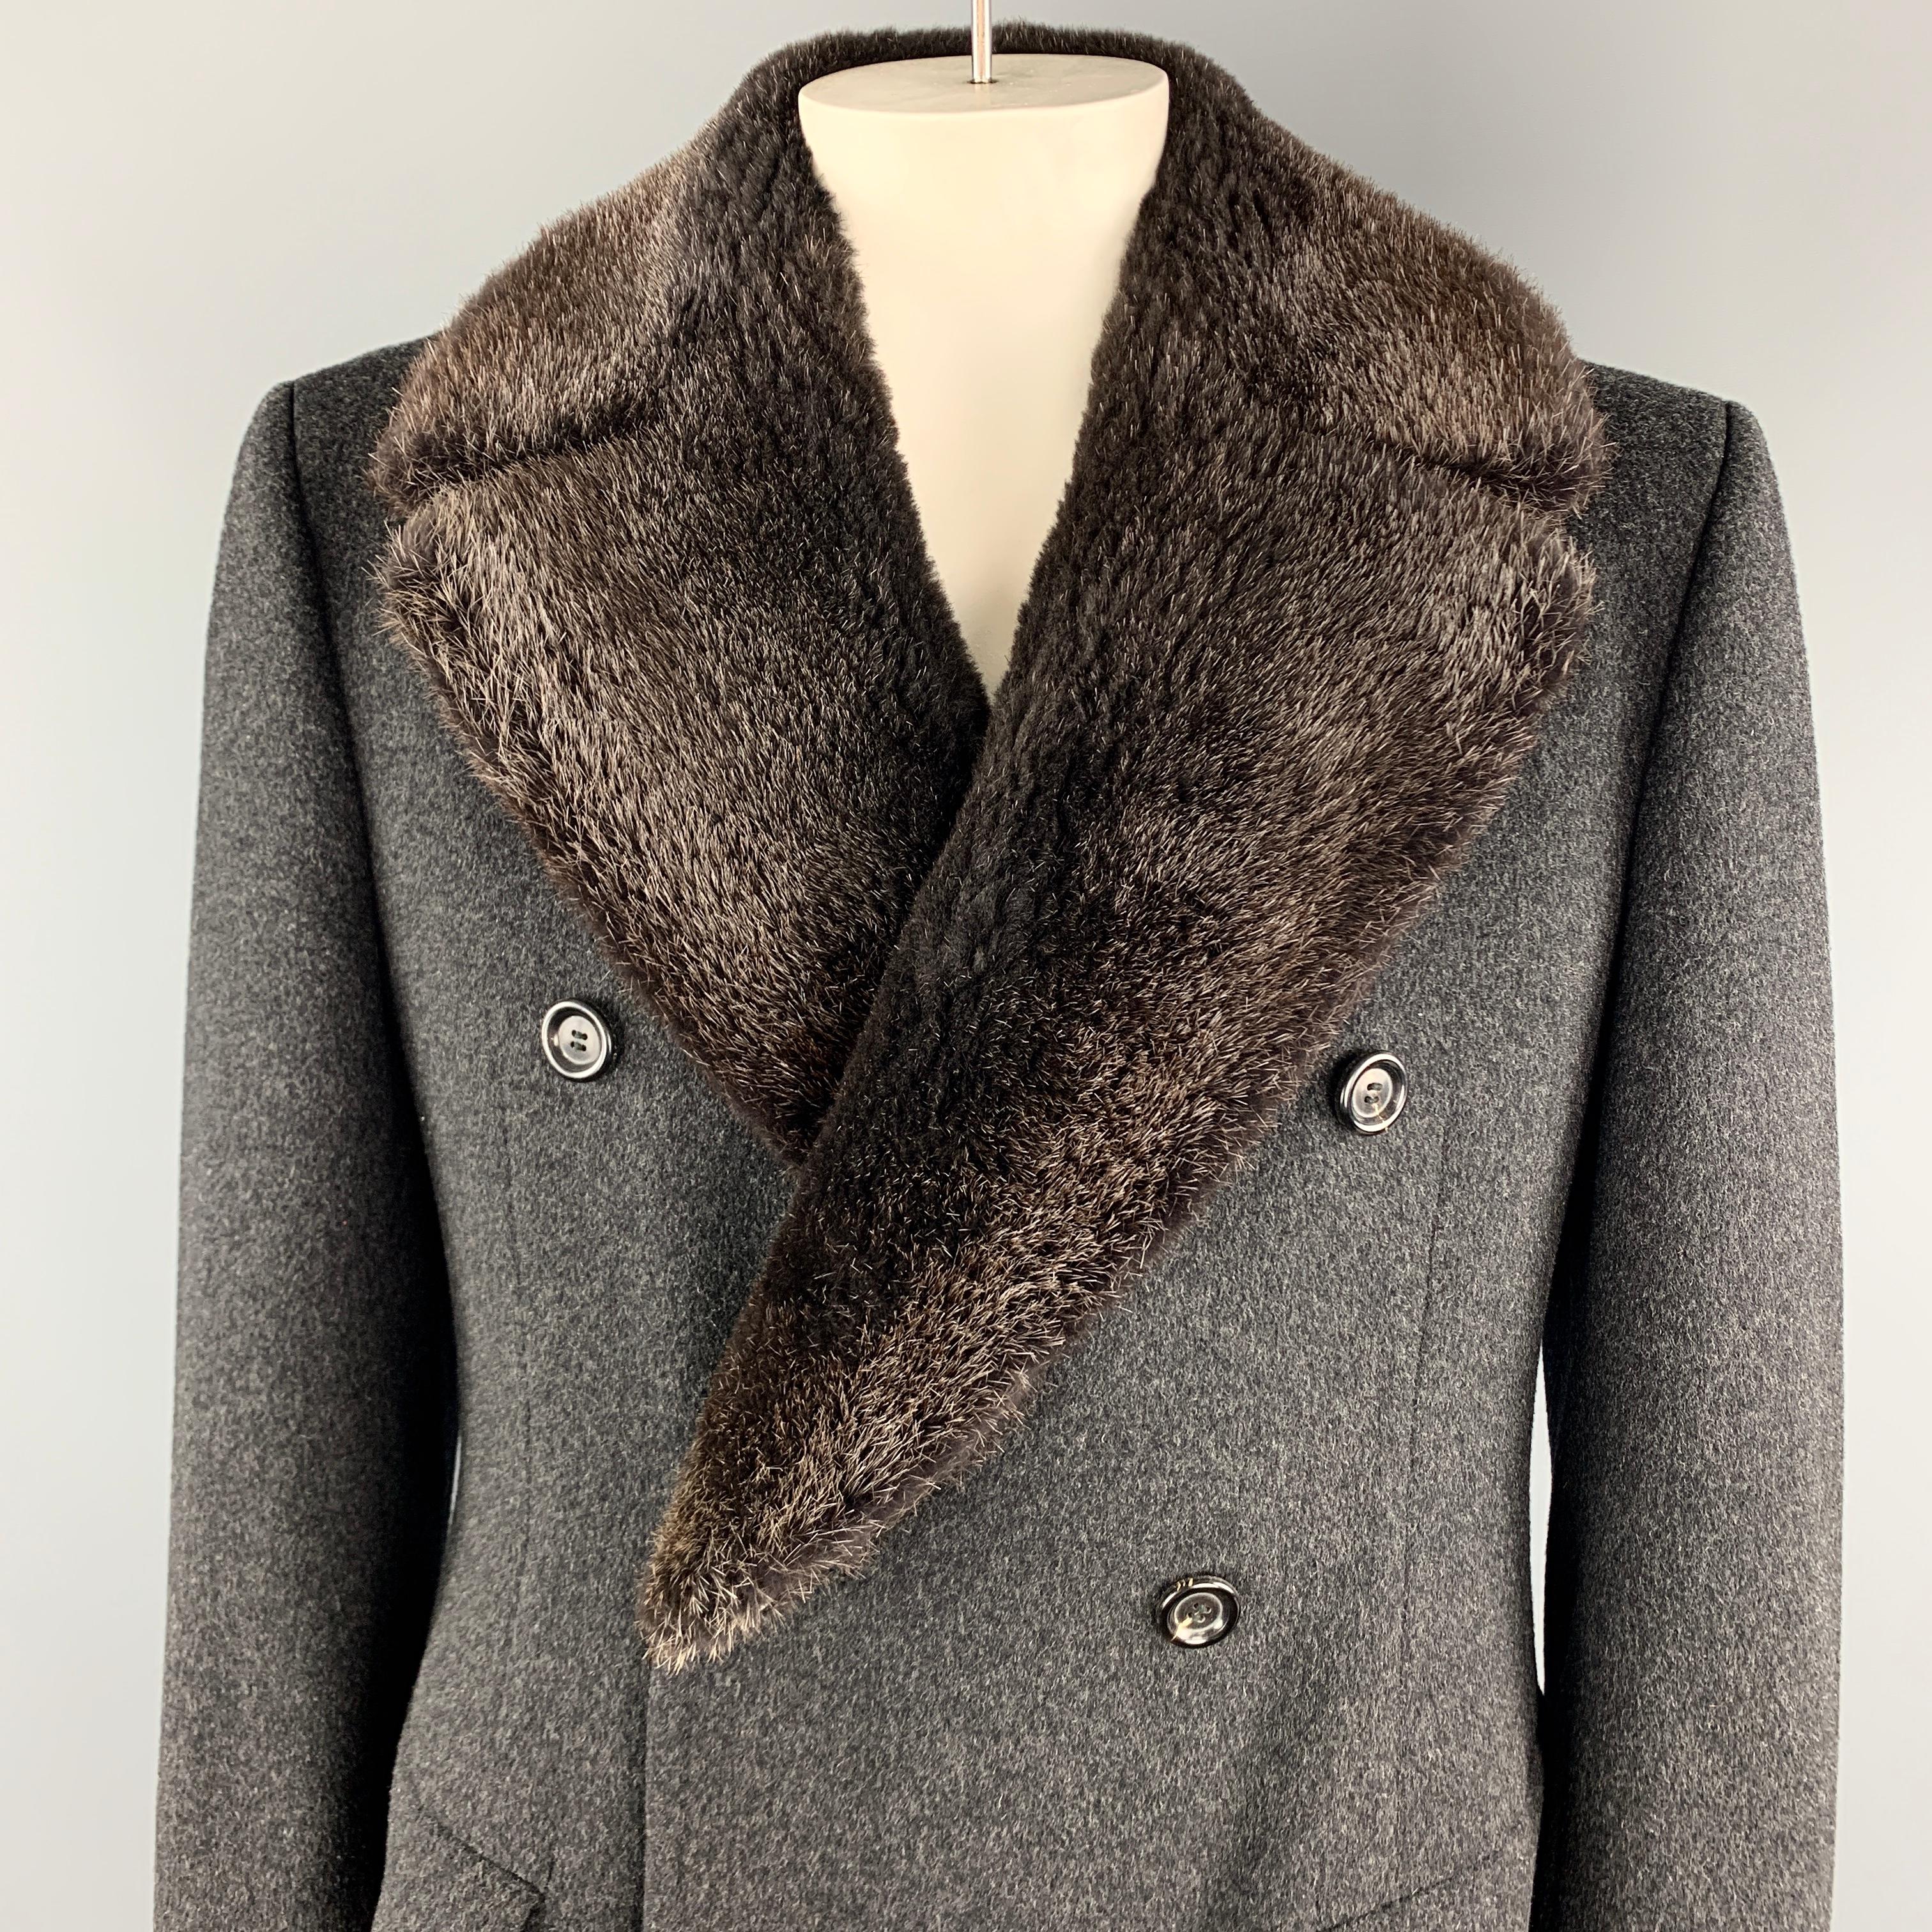 PAUL STUART Long Coat comes in a solid charcoal wool material, with a camel hair lapel, double breasted, with flap pockets, unbuttoned cuffs, and a single vent at back. Made in Denmark. 

Excellent Pre-Owned Condition.
Marked: No